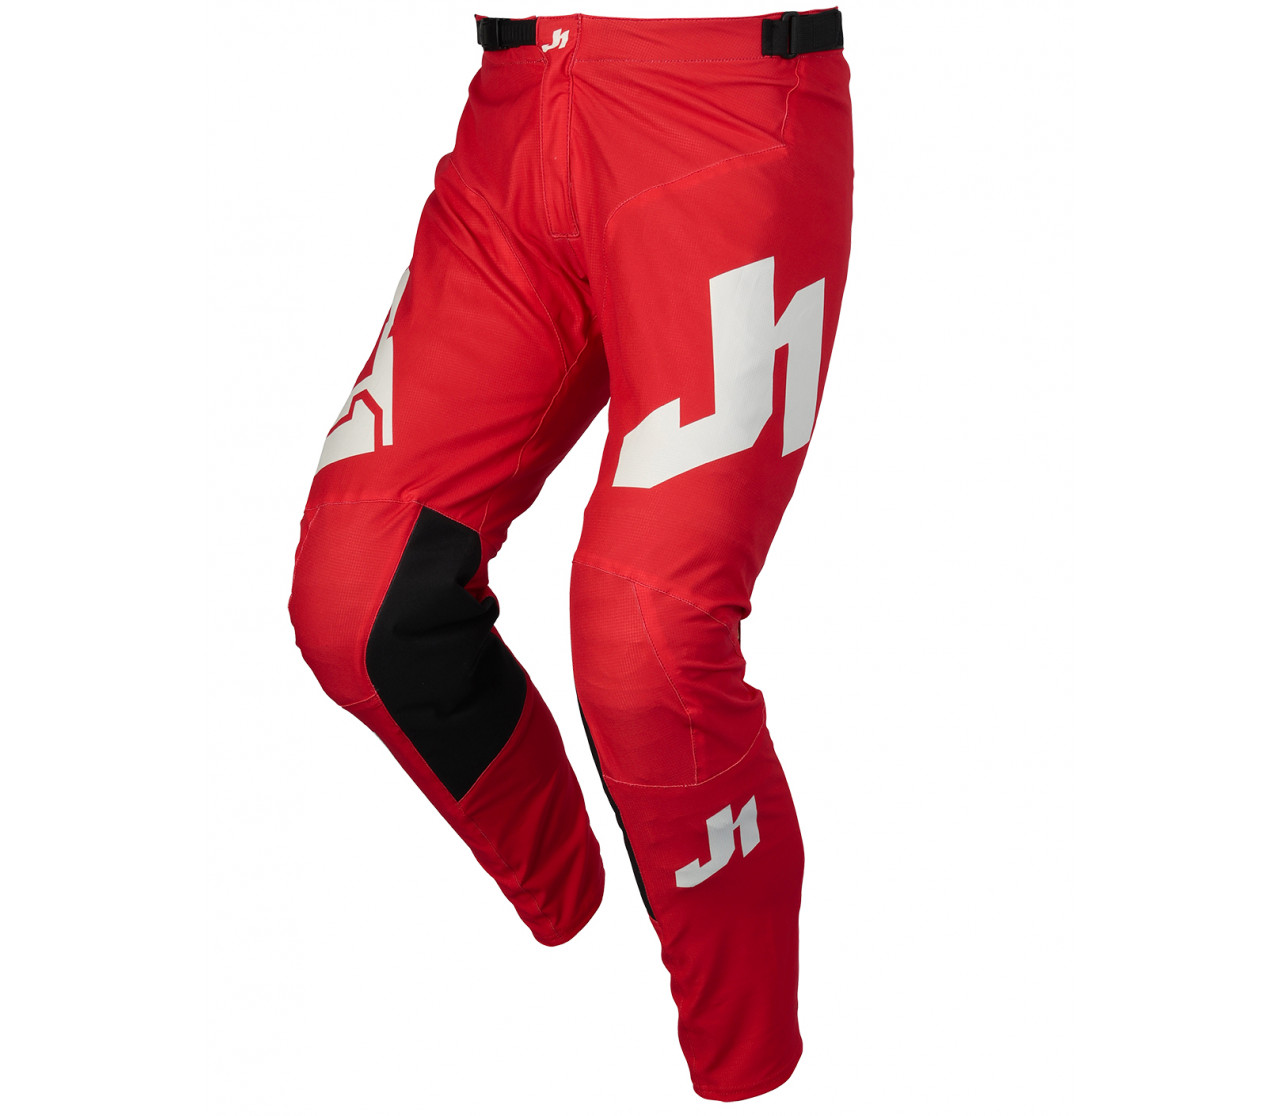 JUST1 PANTS J-ESSENTIAL YOUTH SOLID RED